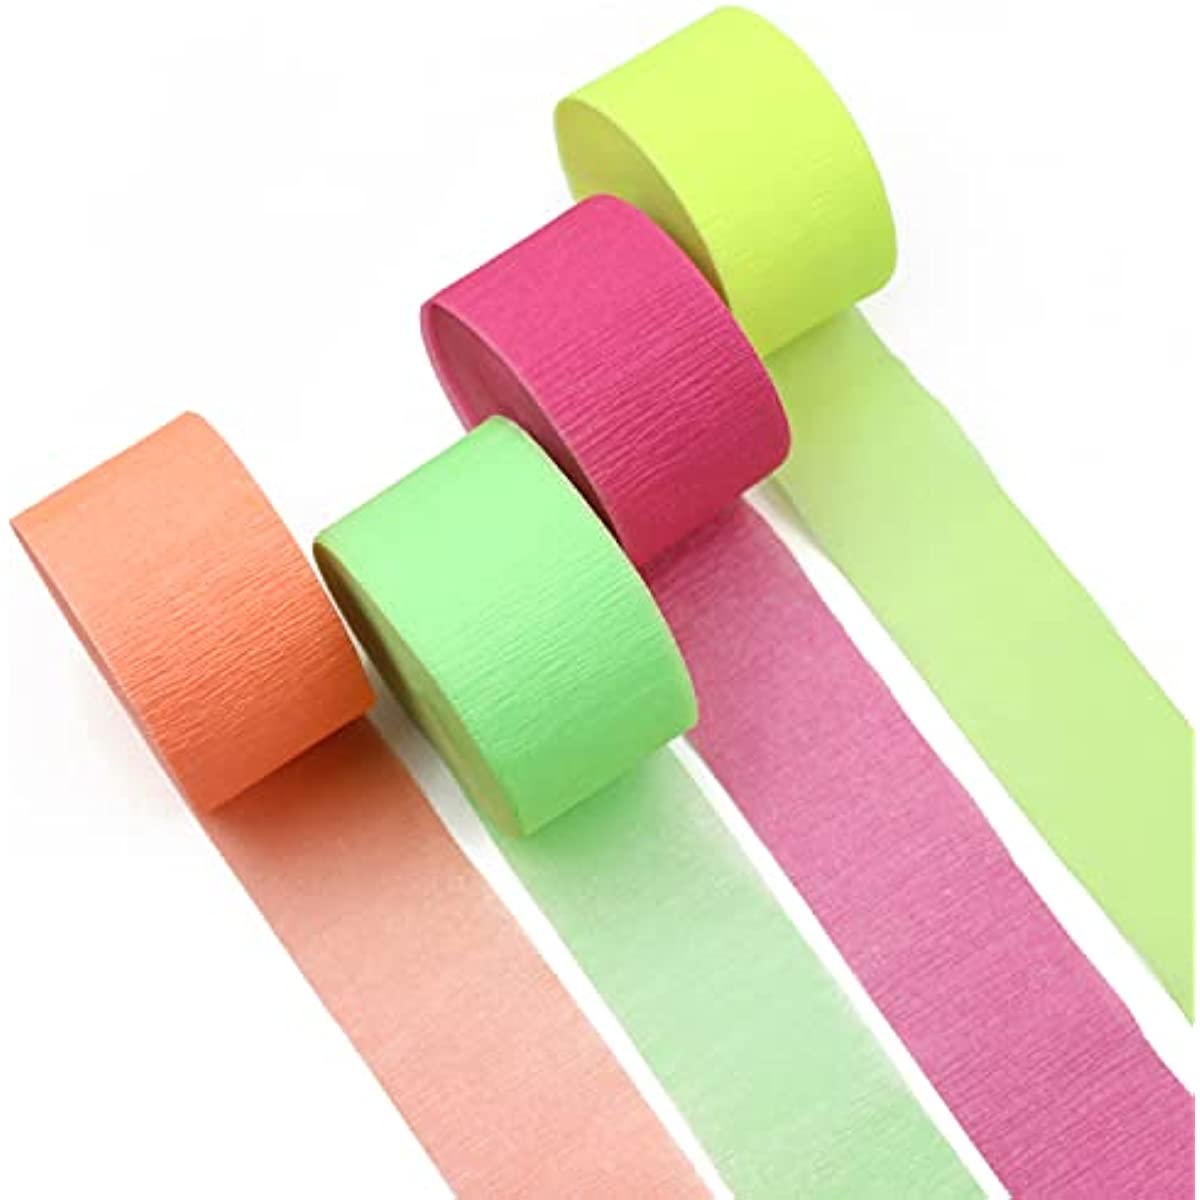 Neon Streamers Glow in The Dark Crepe Paper, Blacklight UV Reactive Fluorescent Streamers for Neon Party